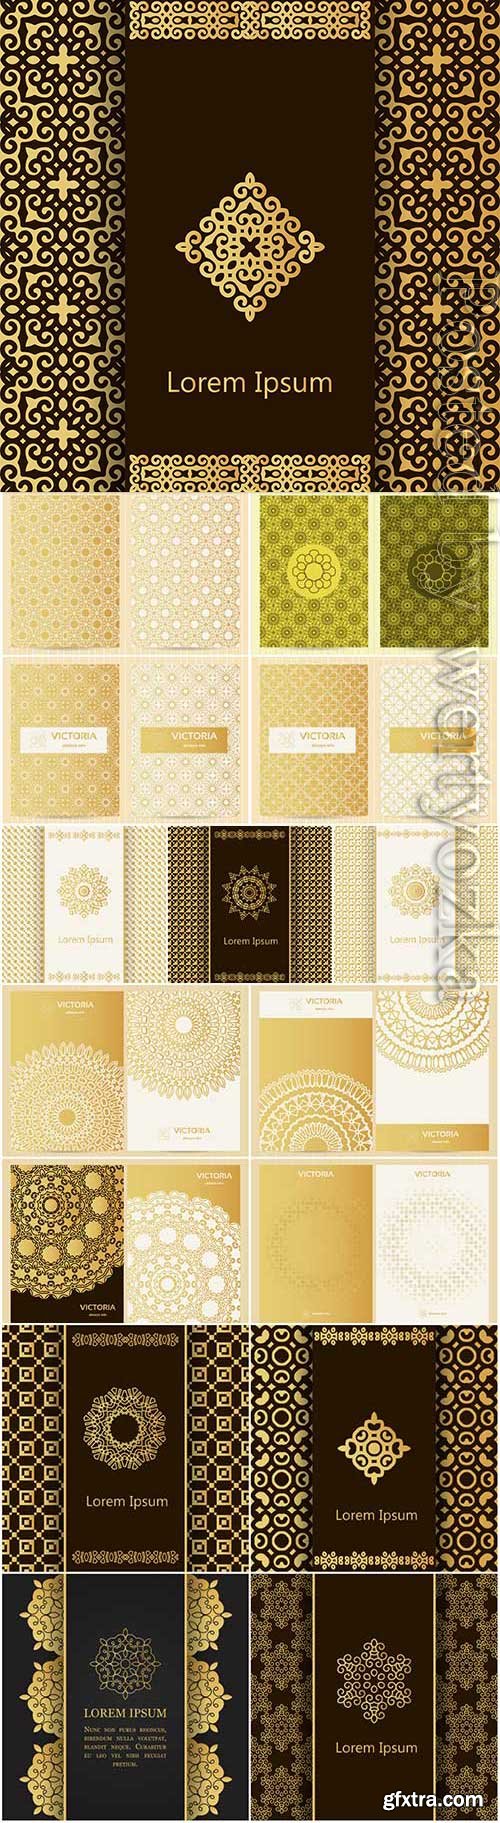 Backgrounds with patterns in oriental style in vector